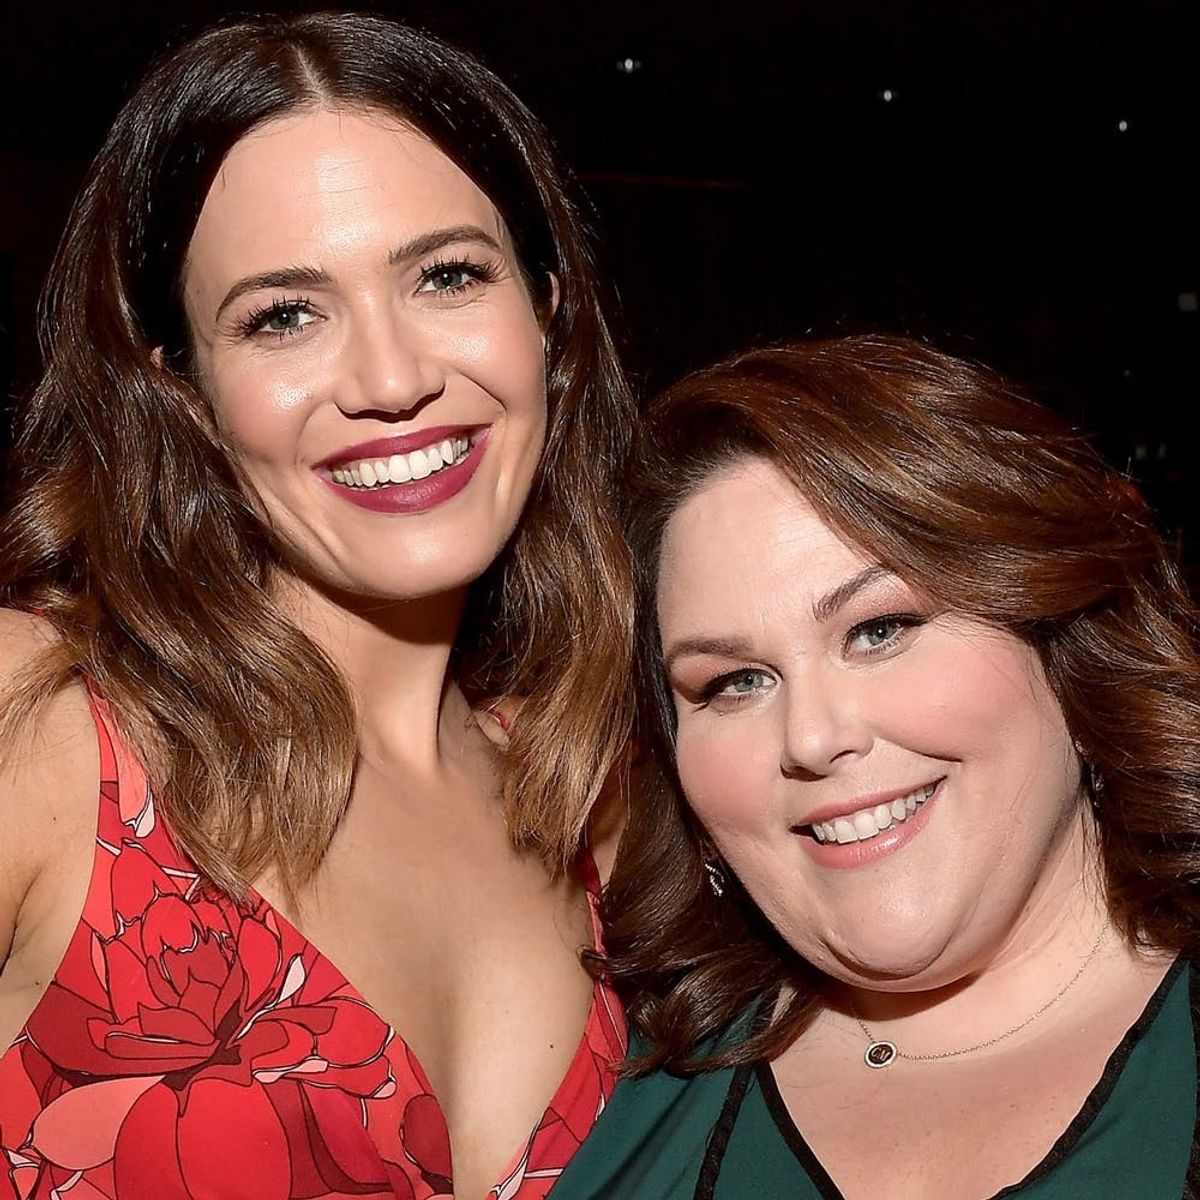 Mandy Moore Says the Season 3 Premiere of ‘This Is Us’ “Is Not for the Faint of Heart”